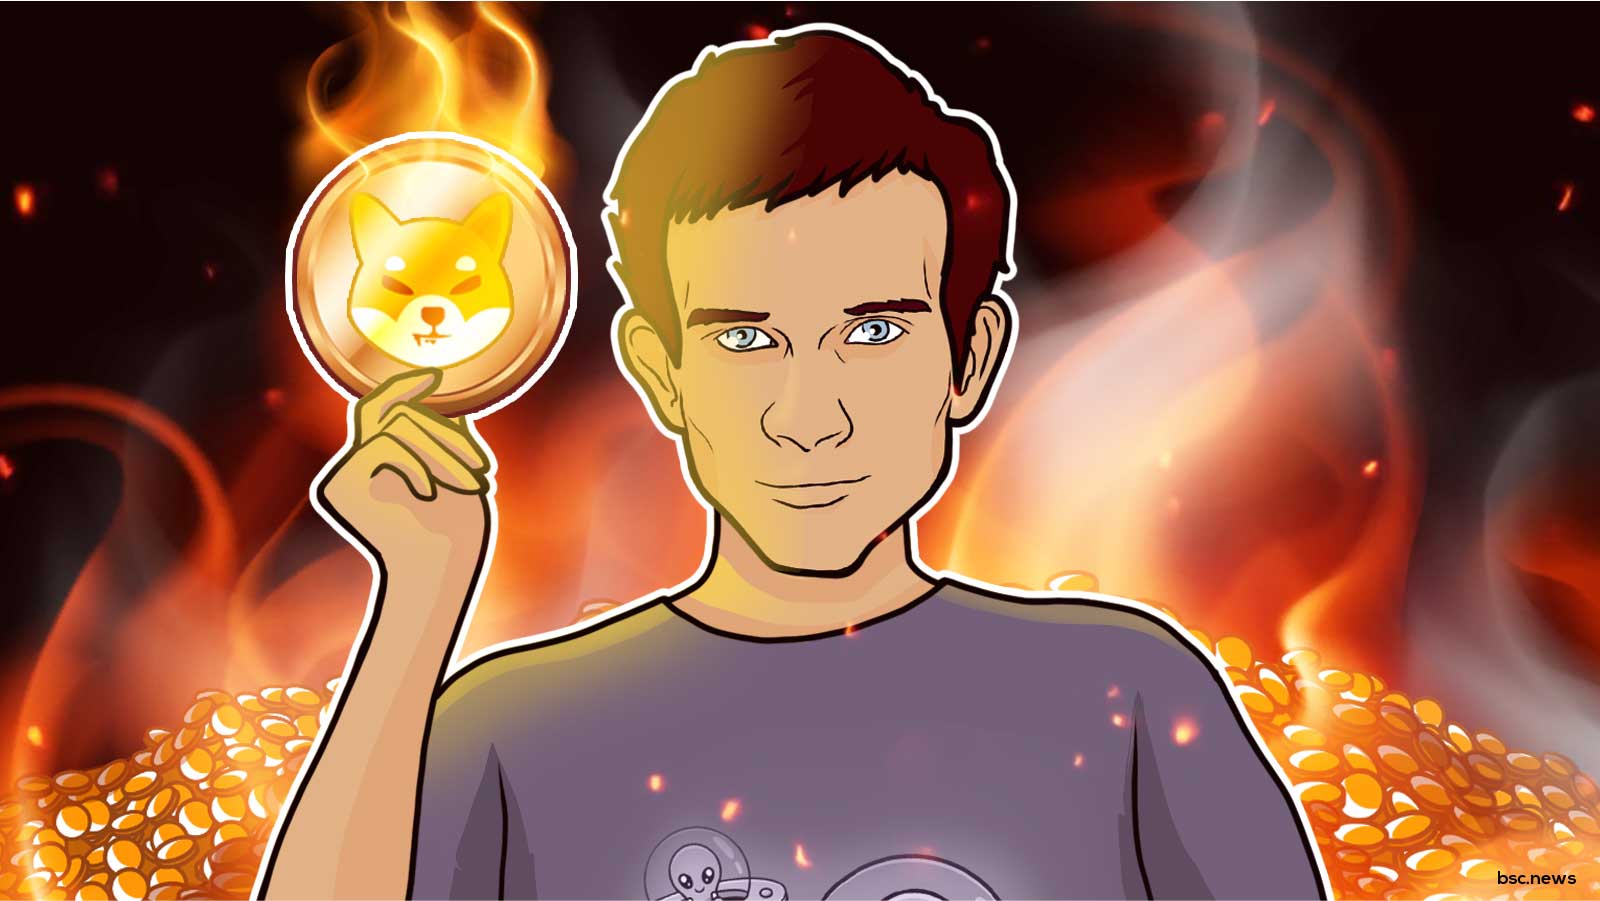 Animated picture of Ethereum founder Vitalik Buterin holding burning SHIB coin